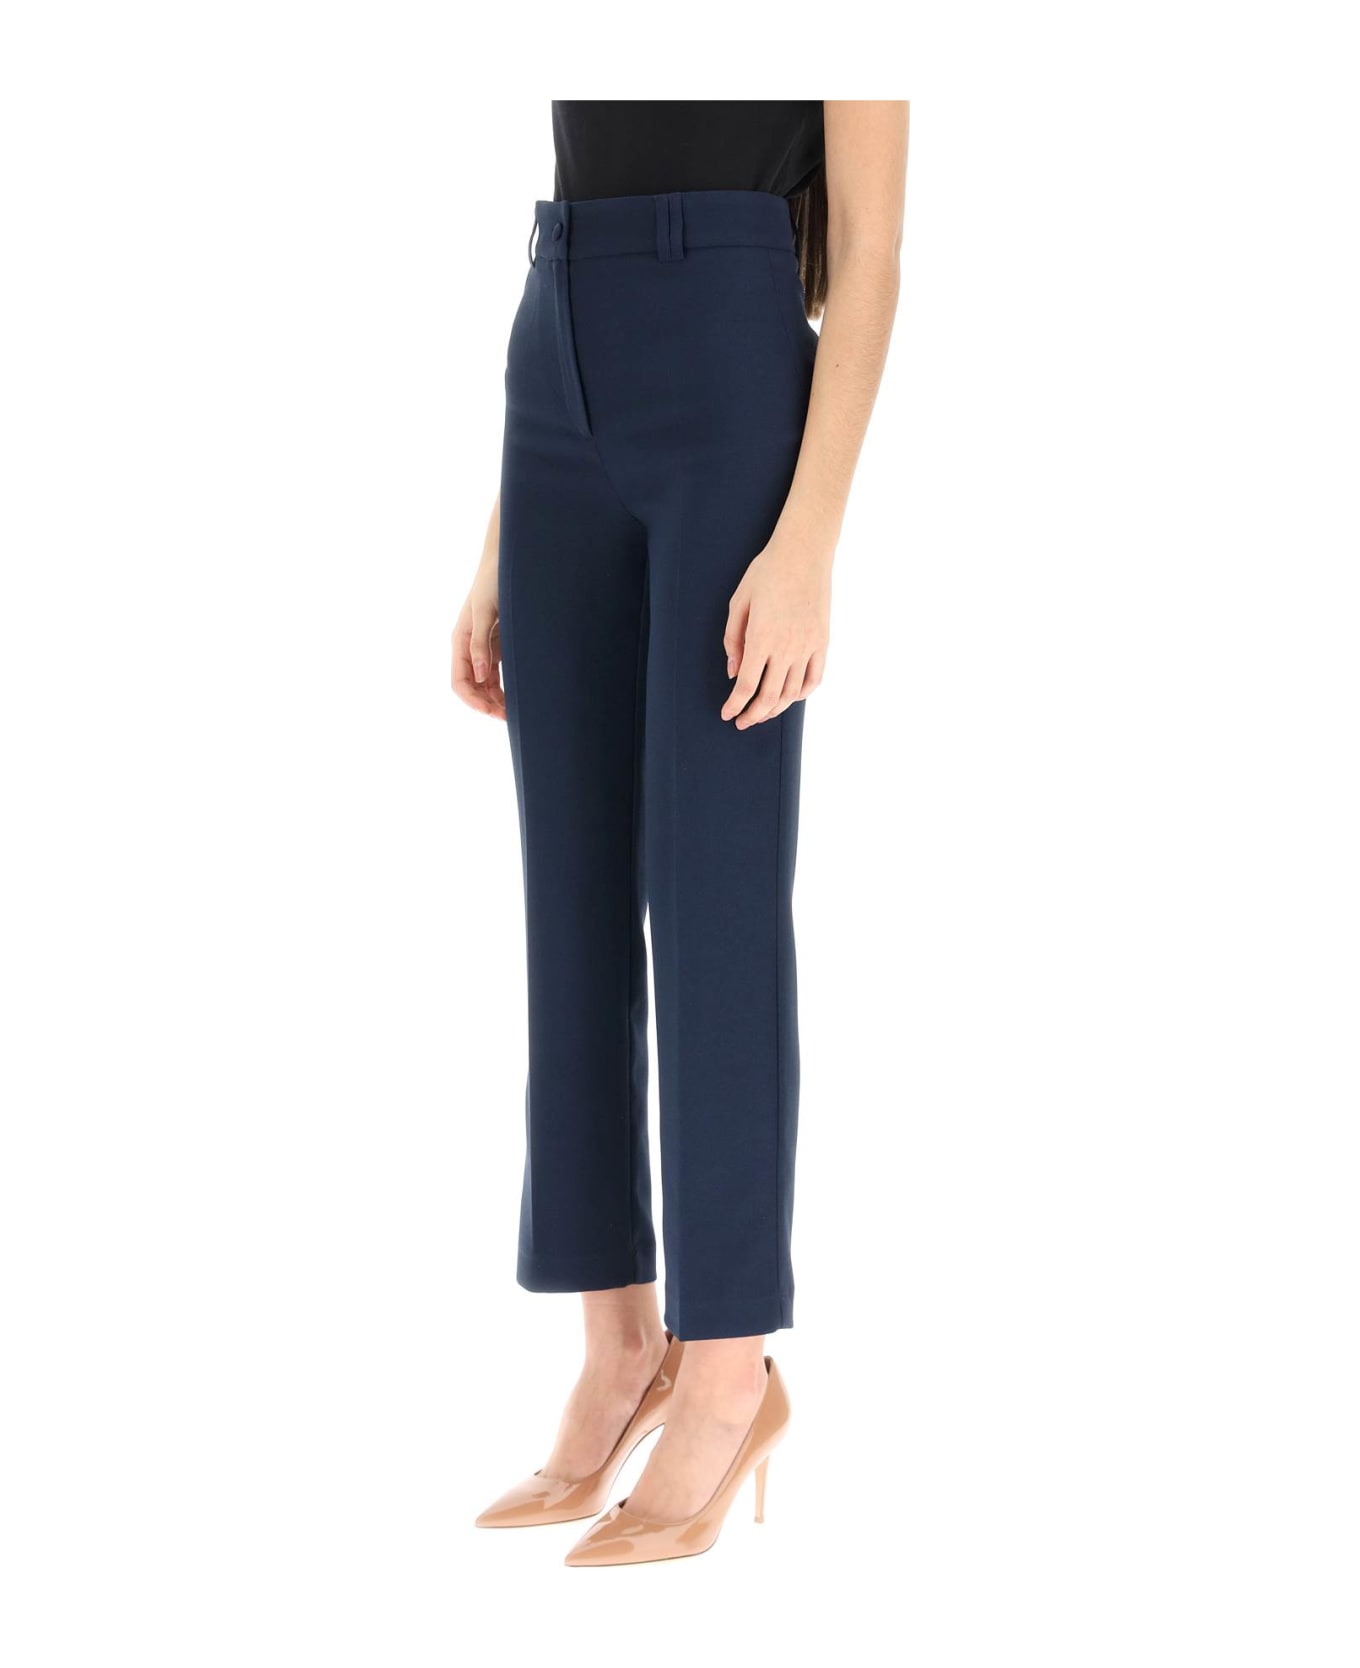 Hebe Studio 'loulou' Cady Trousers - NAVY (Blue) ボトムス